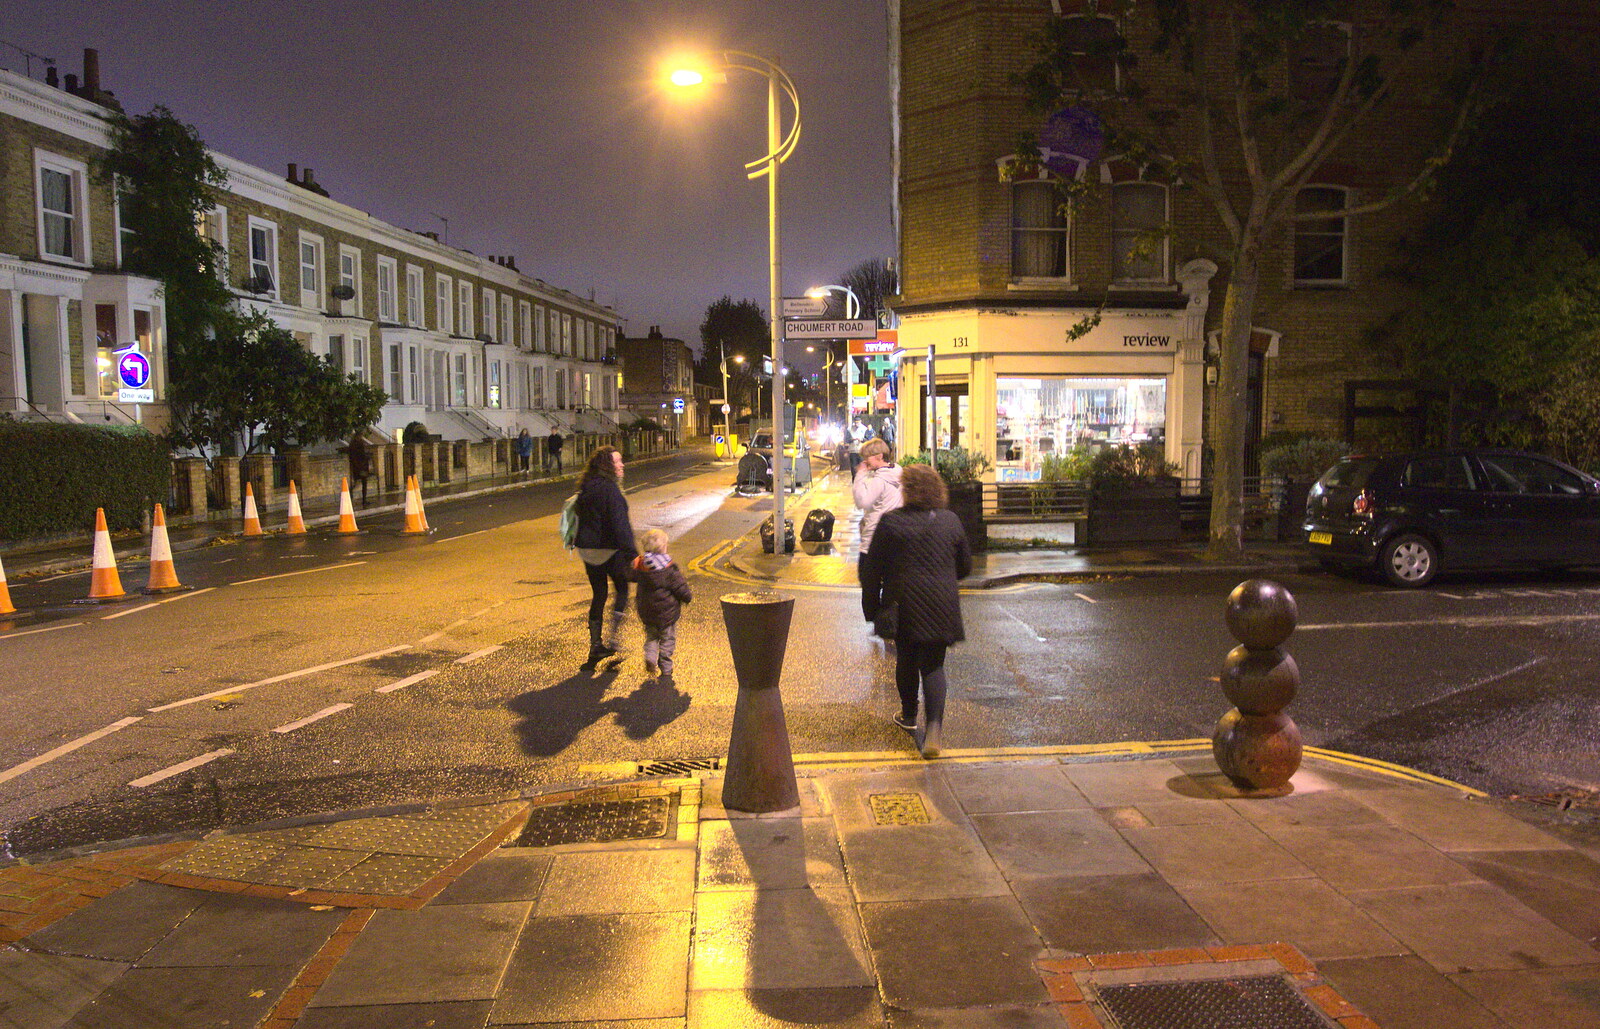 Wandering off up Bellenden Road from Another Trip to Peckham, Southwark, London - 28th October 2012